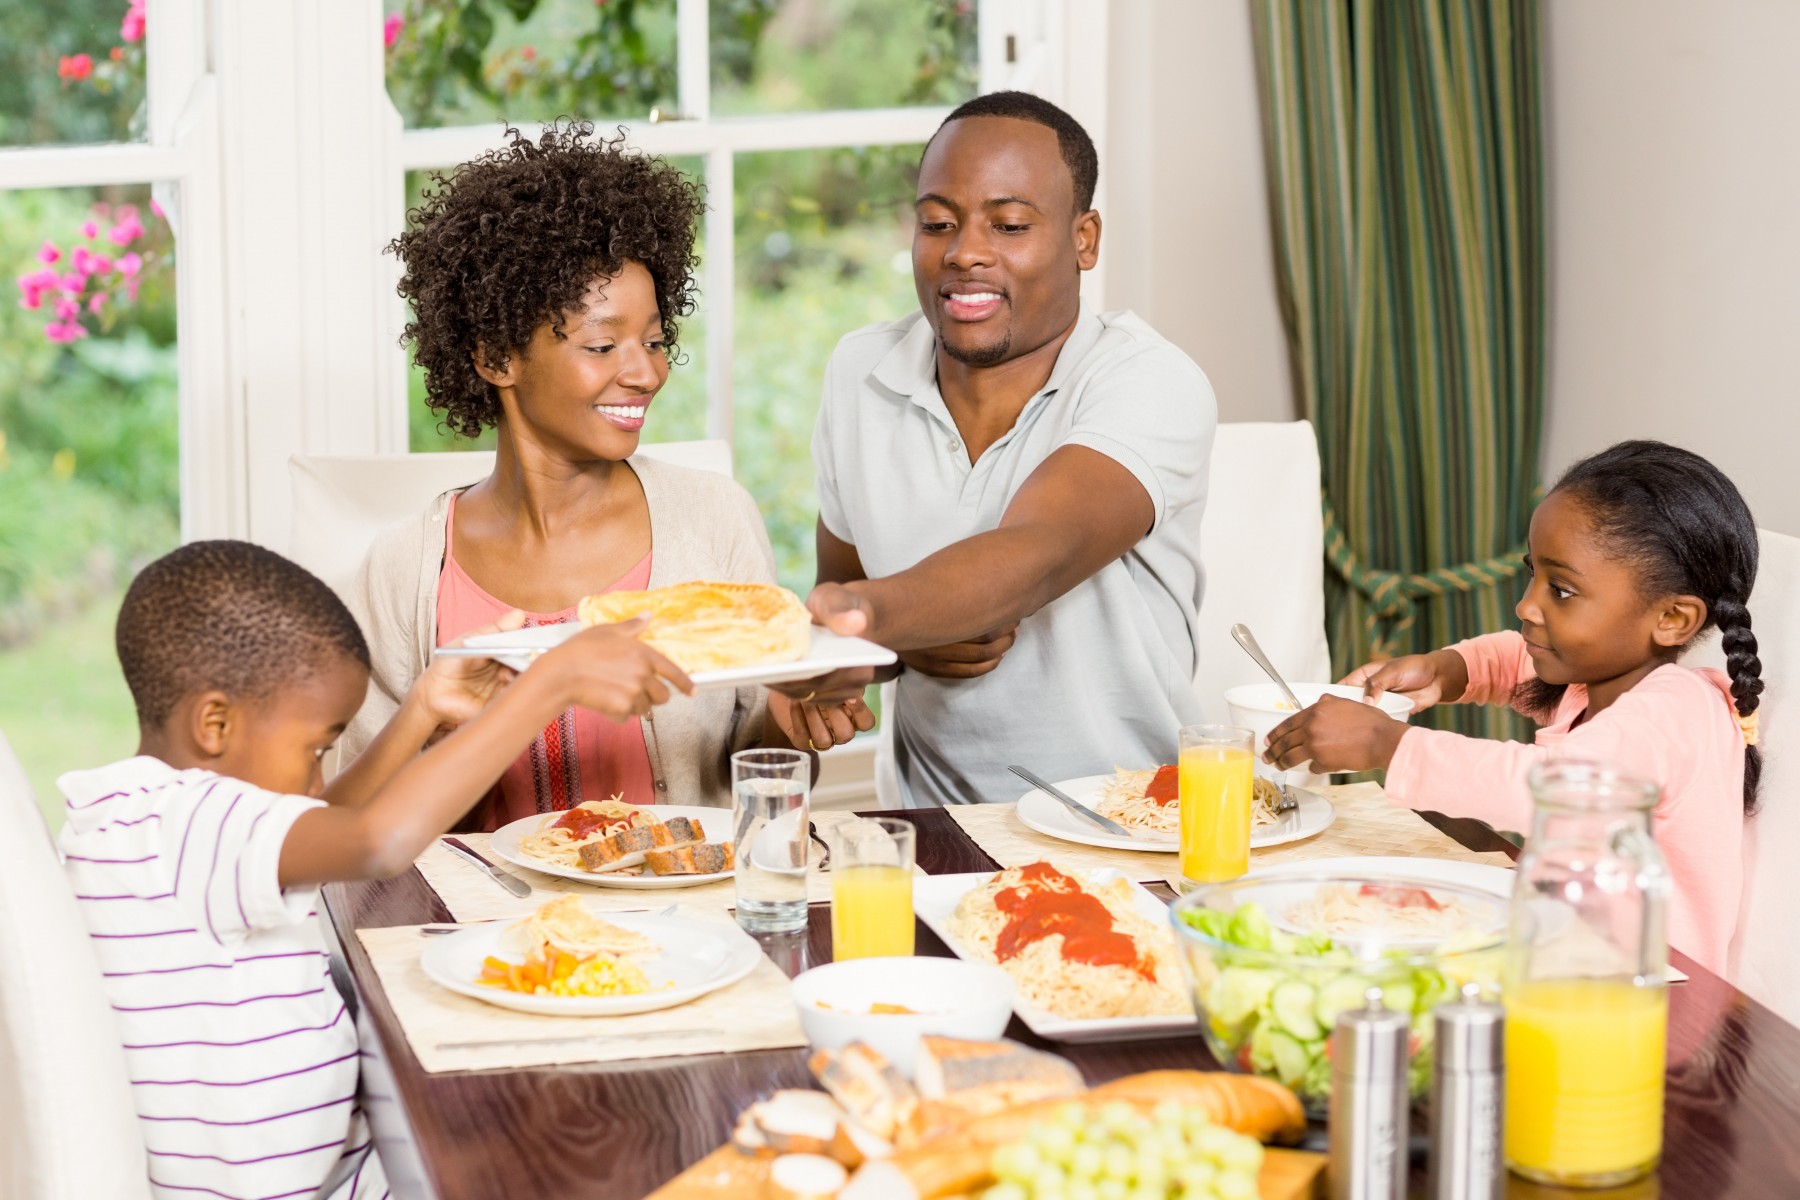 Happy family eating together - Food Ingredient Facts